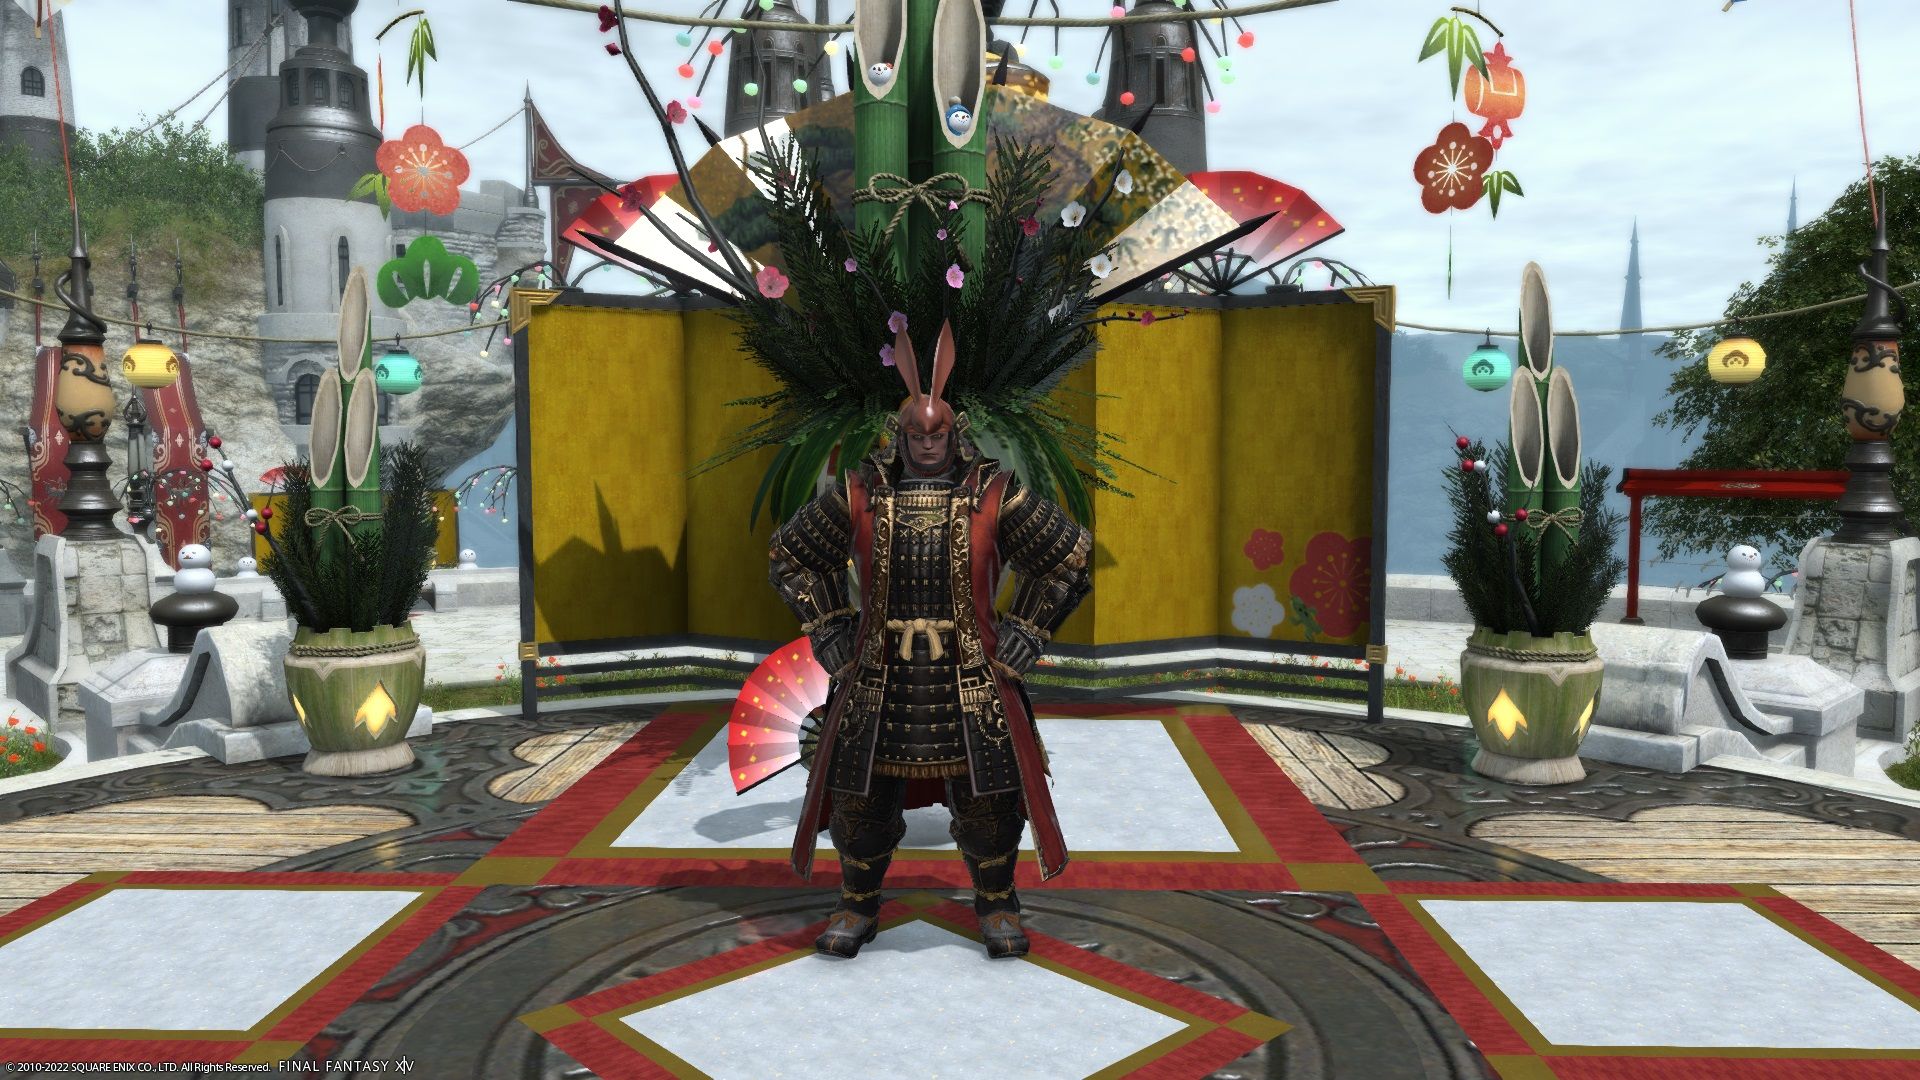 Final Fantasy 14 - Usagi Bugyo in front of the Heavensturn decorations